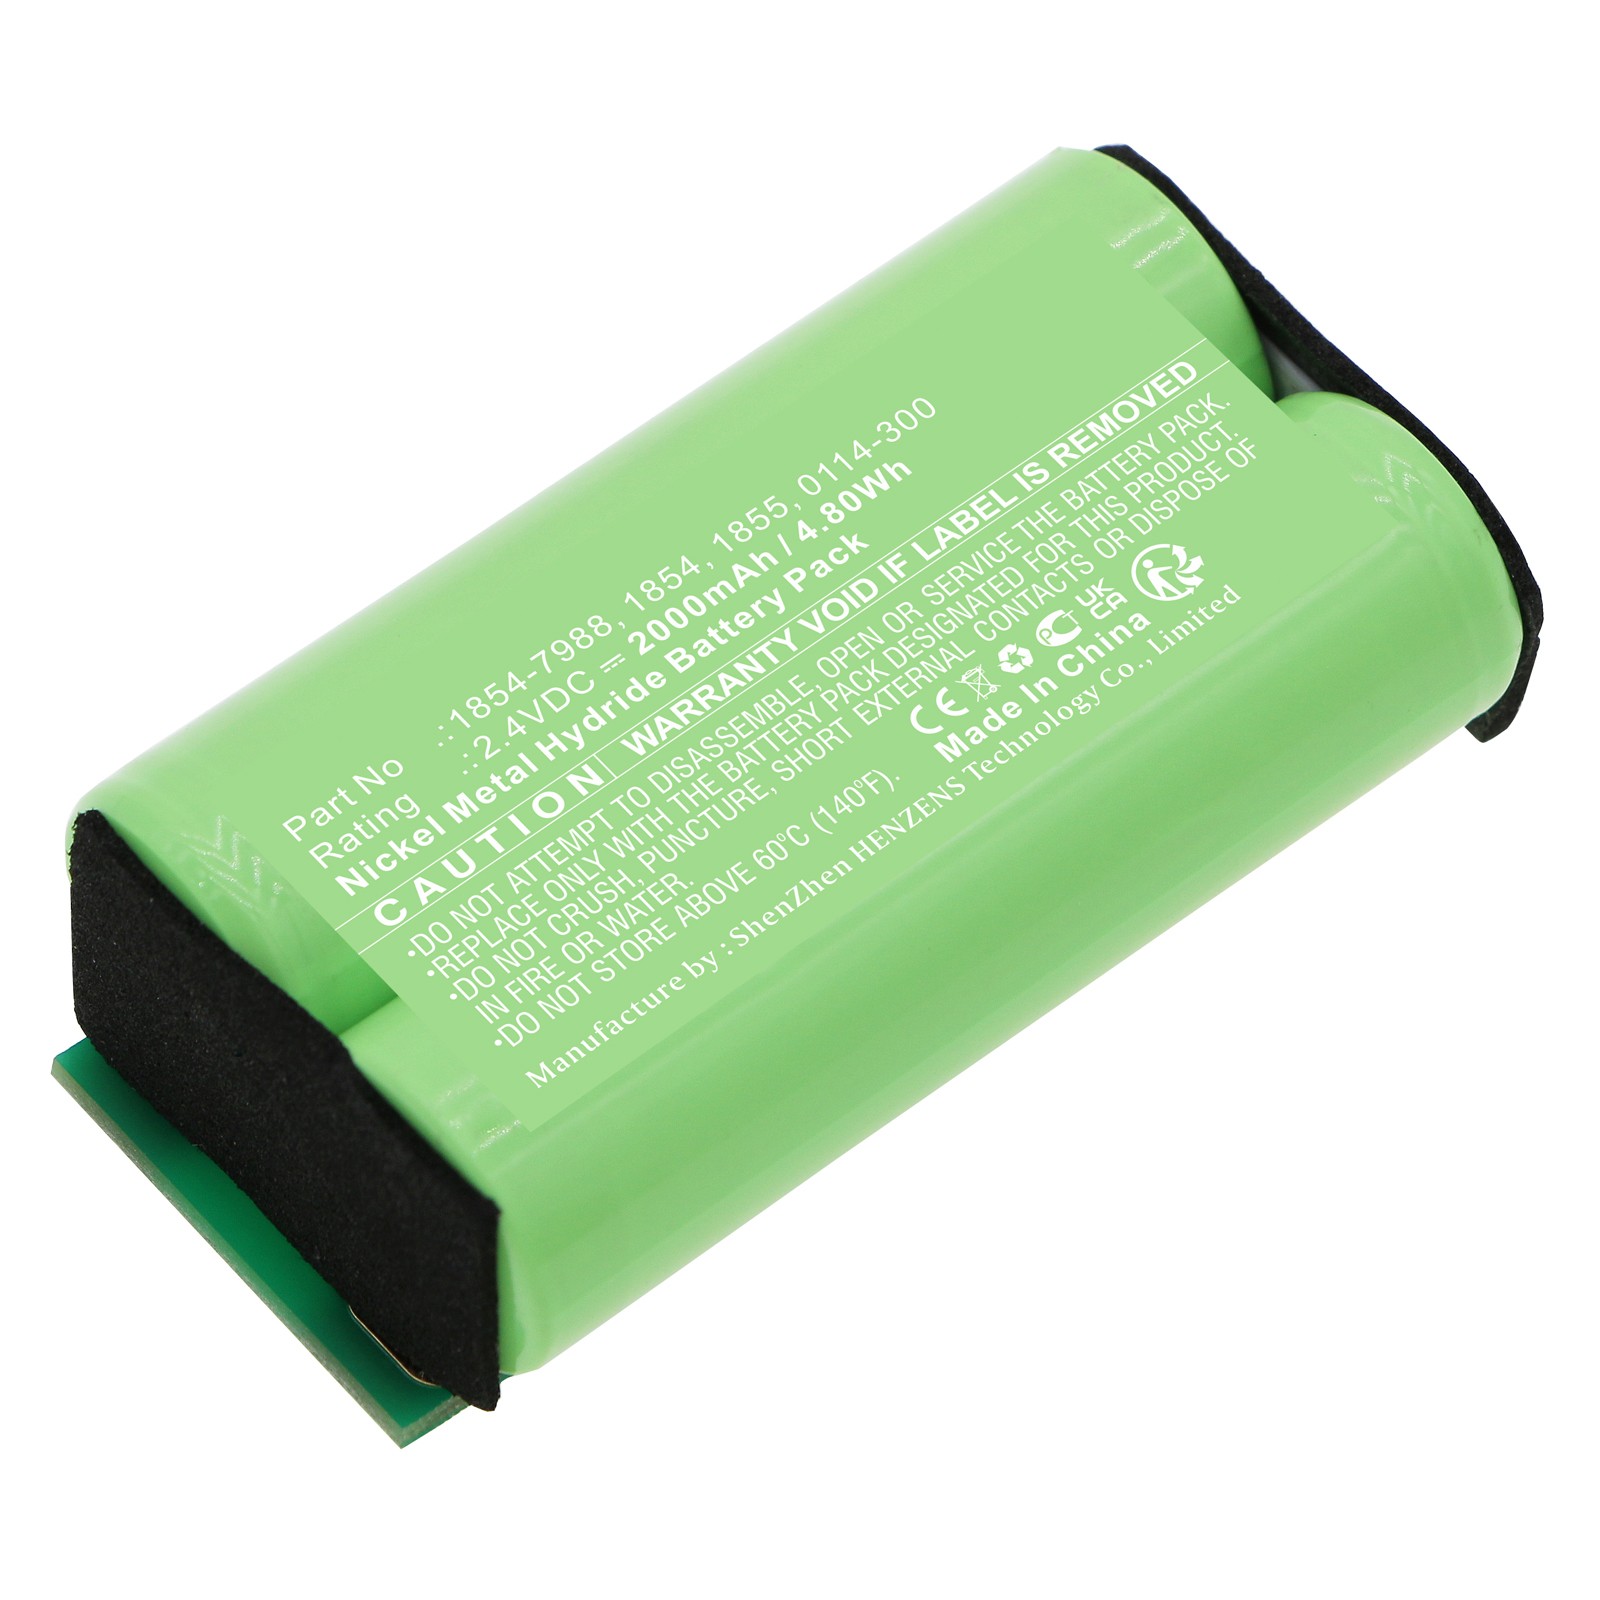 Synergy Digital Shaver Battery, Compatible with Wahl 1854 Shaver Battery (Ni-MH, 2.4V, 2000mAh)